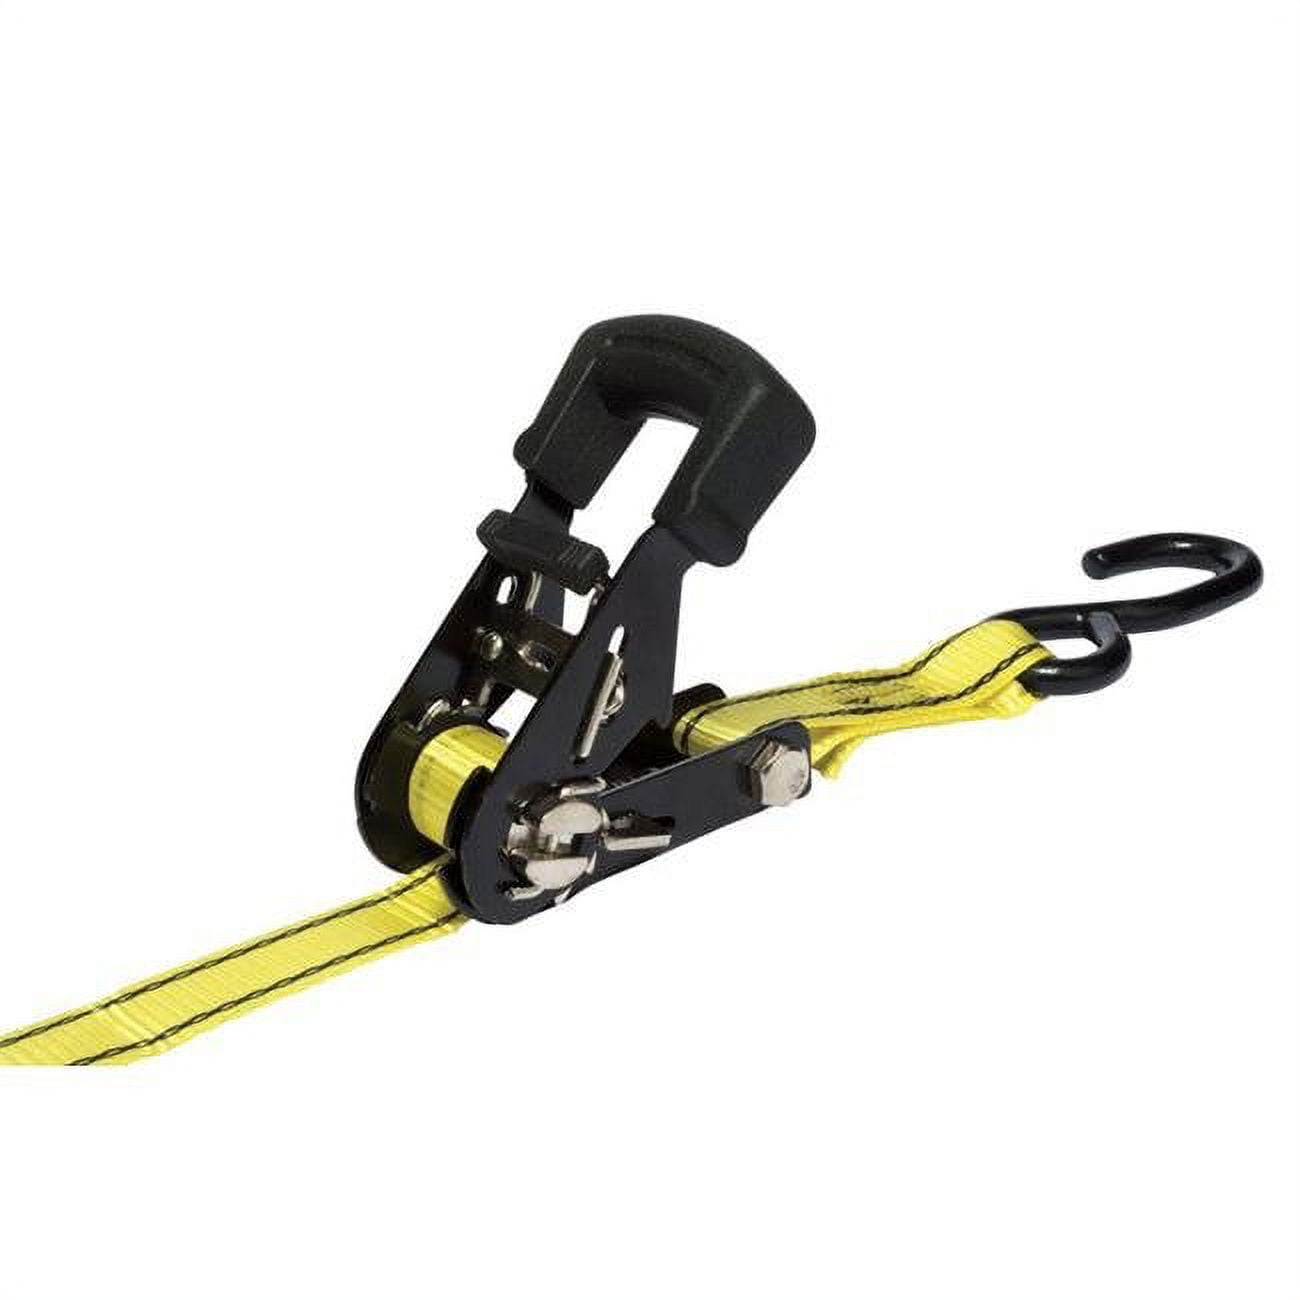 Picture of Pro Grip 85084 16 ft. L x 1500 lbs Double J Polyester Standard Tie Down Hooks, Black & Yellow